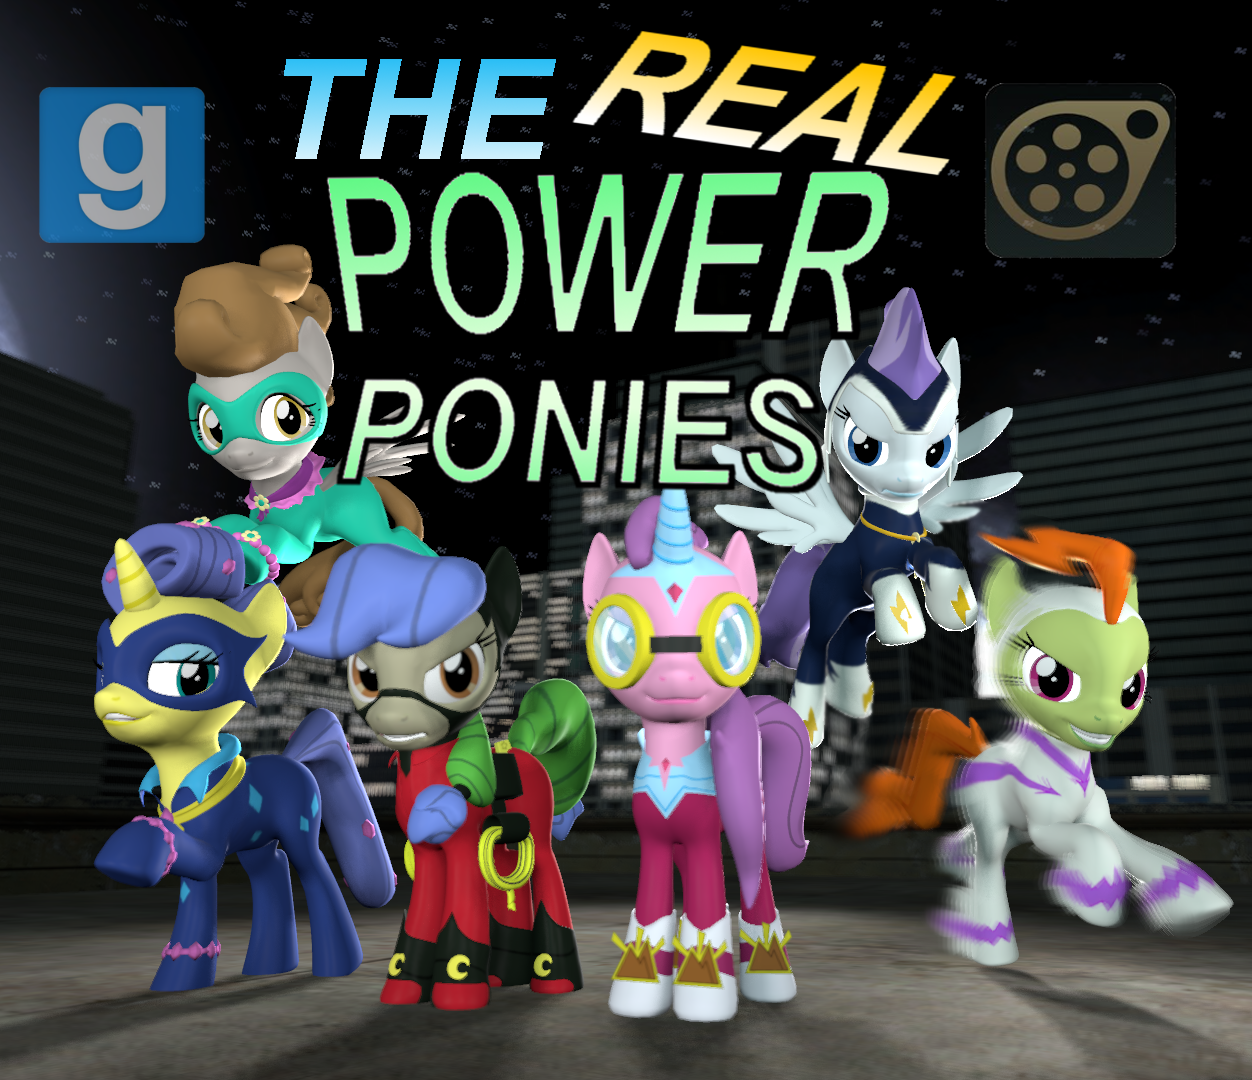 [DL] The Power Ponies (IDW) ver 1.2